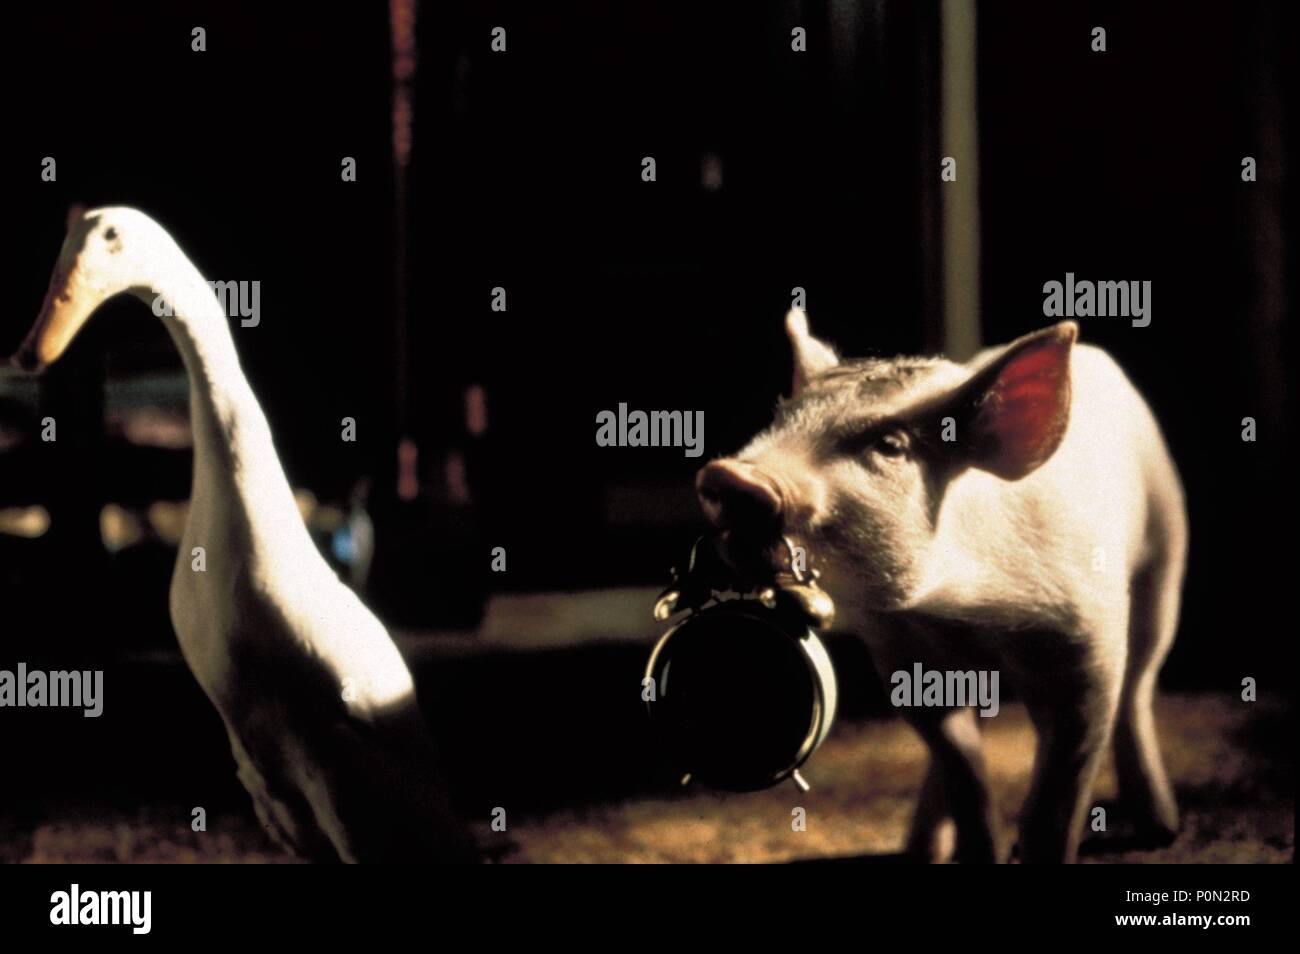 Original Film Title: BABE, THE GALLANT PIG.  English Title: BABE, THE GALLANT PIG.  Film Director: CHRIS NOONAN.  Year: 1995. Credit: UNIVERSAL PICTURES / TOWNLEY, JIM / Album Stock Photo